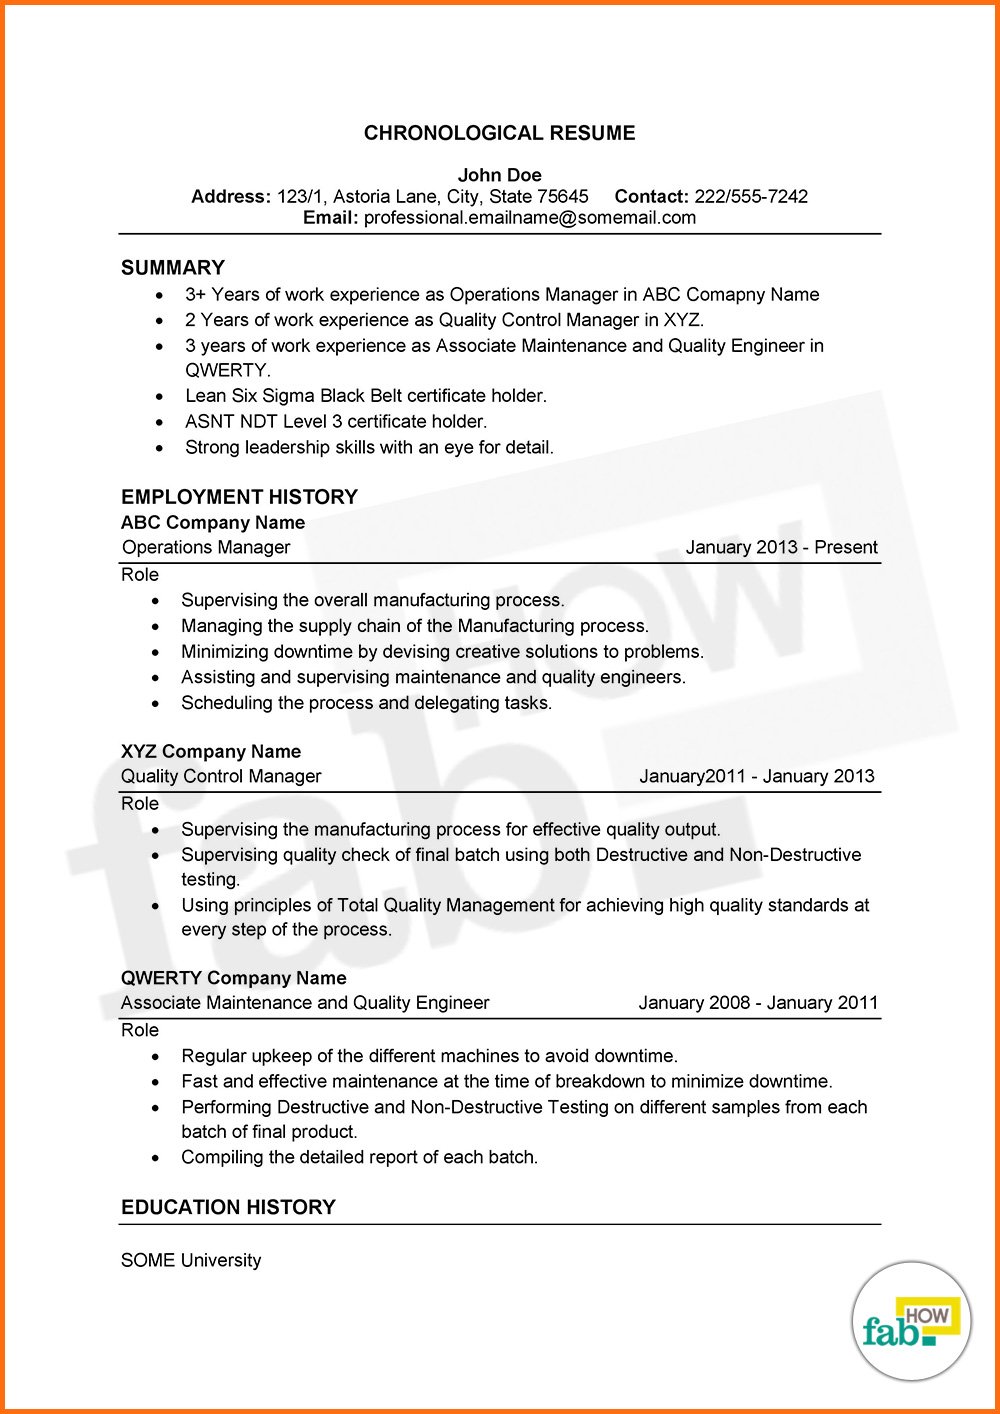 How to Make an Outstanding Resume (Get Free Samples)